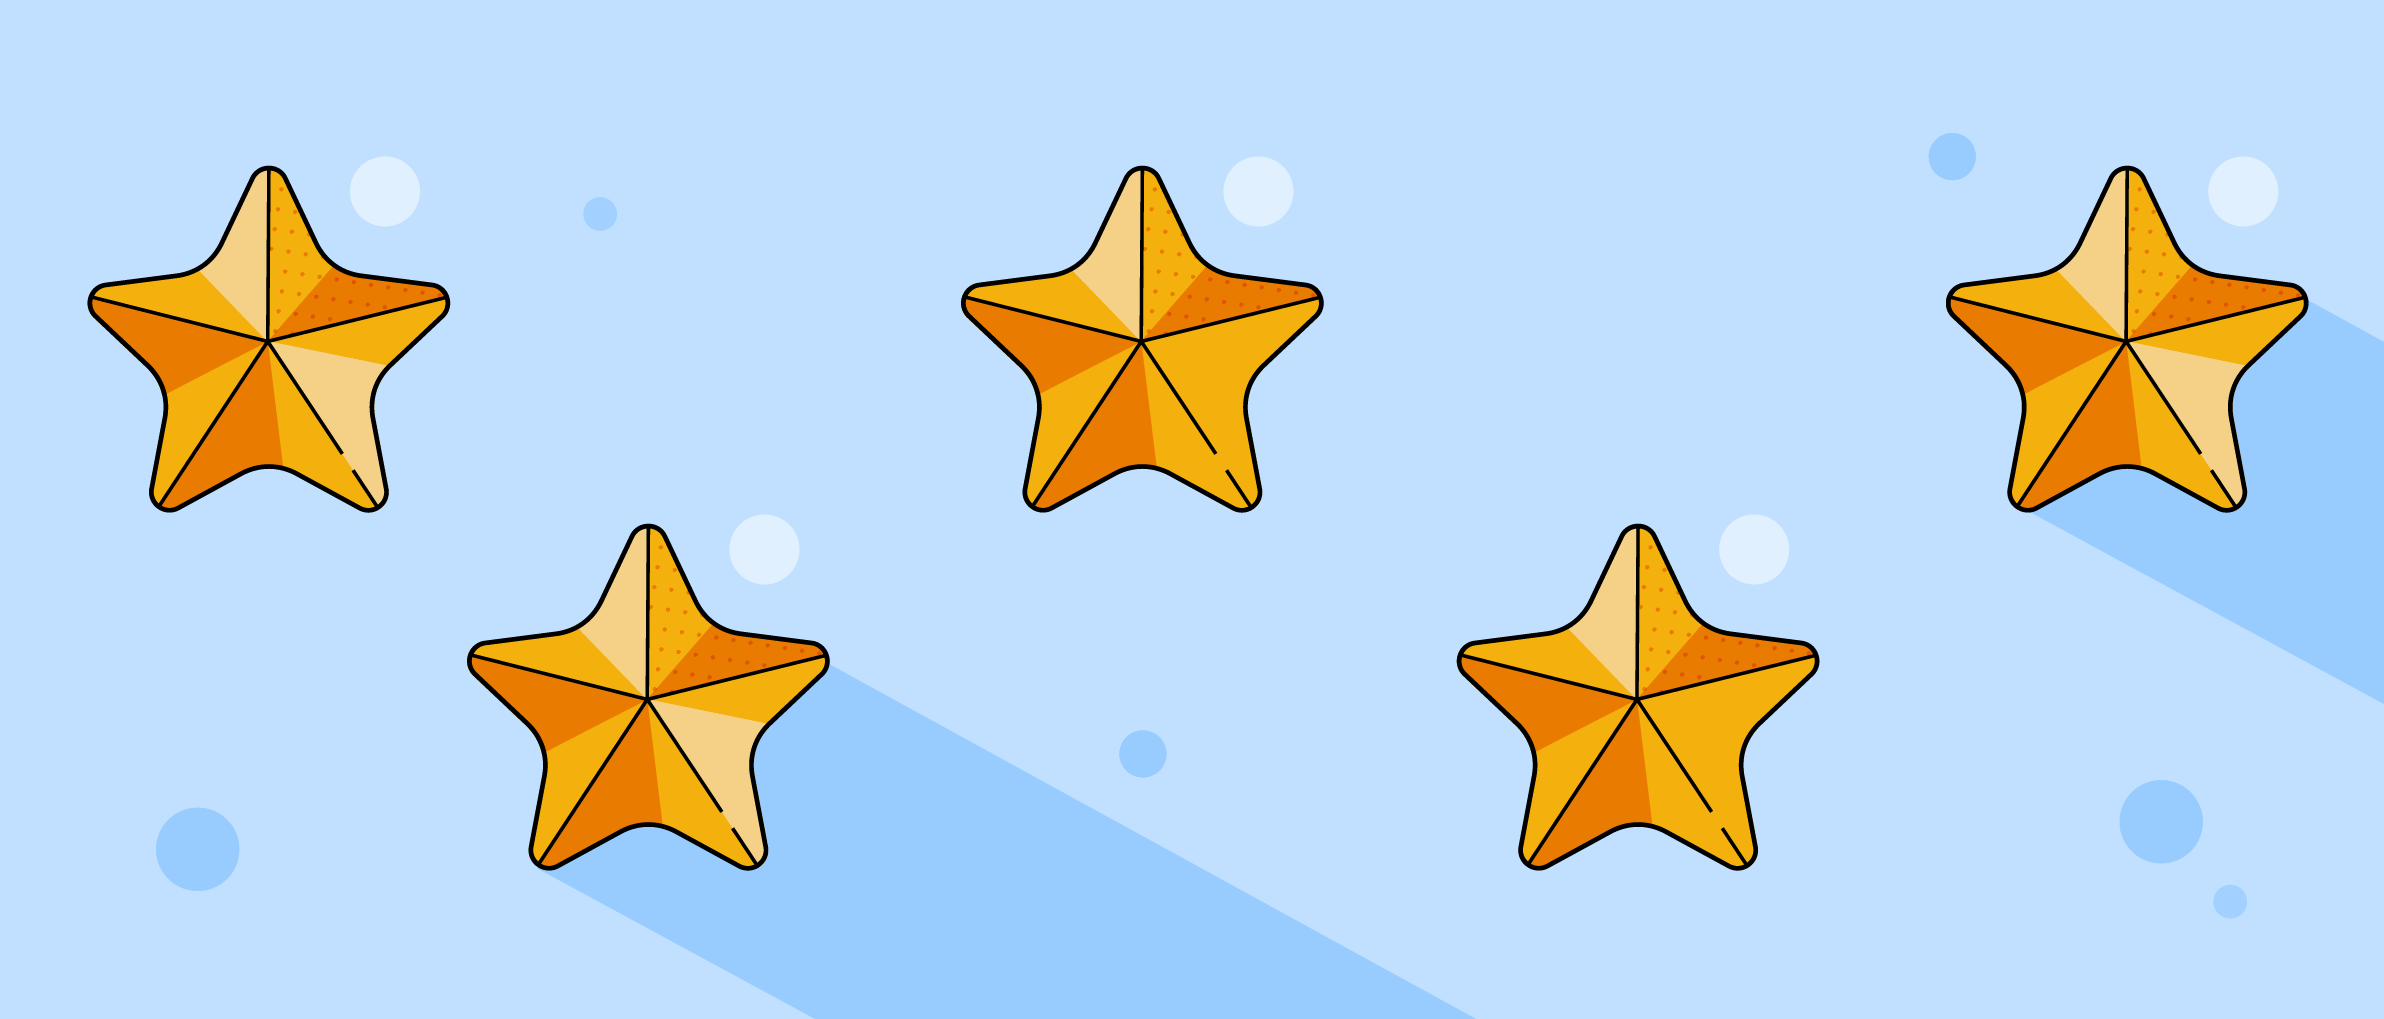 Banner of five cartoony gold-colored starfishes arranged like Olympic circles, but with some spacing between, on a background of water